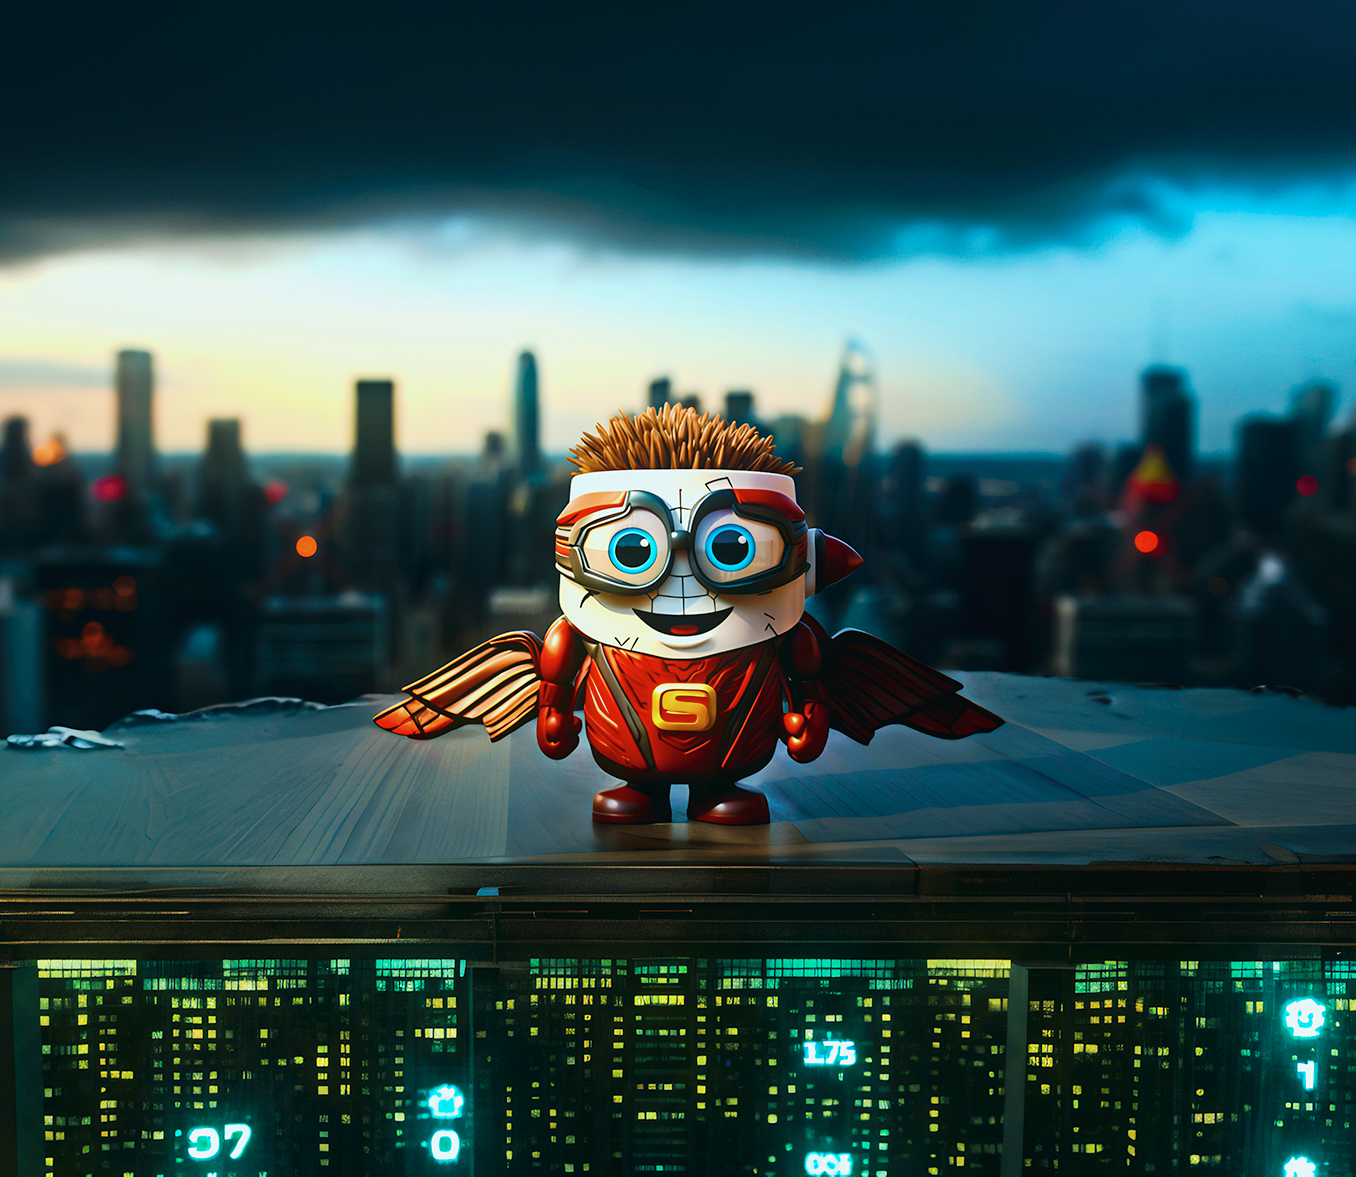 Sippie the coffee mug character in a superhero suit with an S on his chest standing on the ledge of a high-rise overlooking the city at dusk.